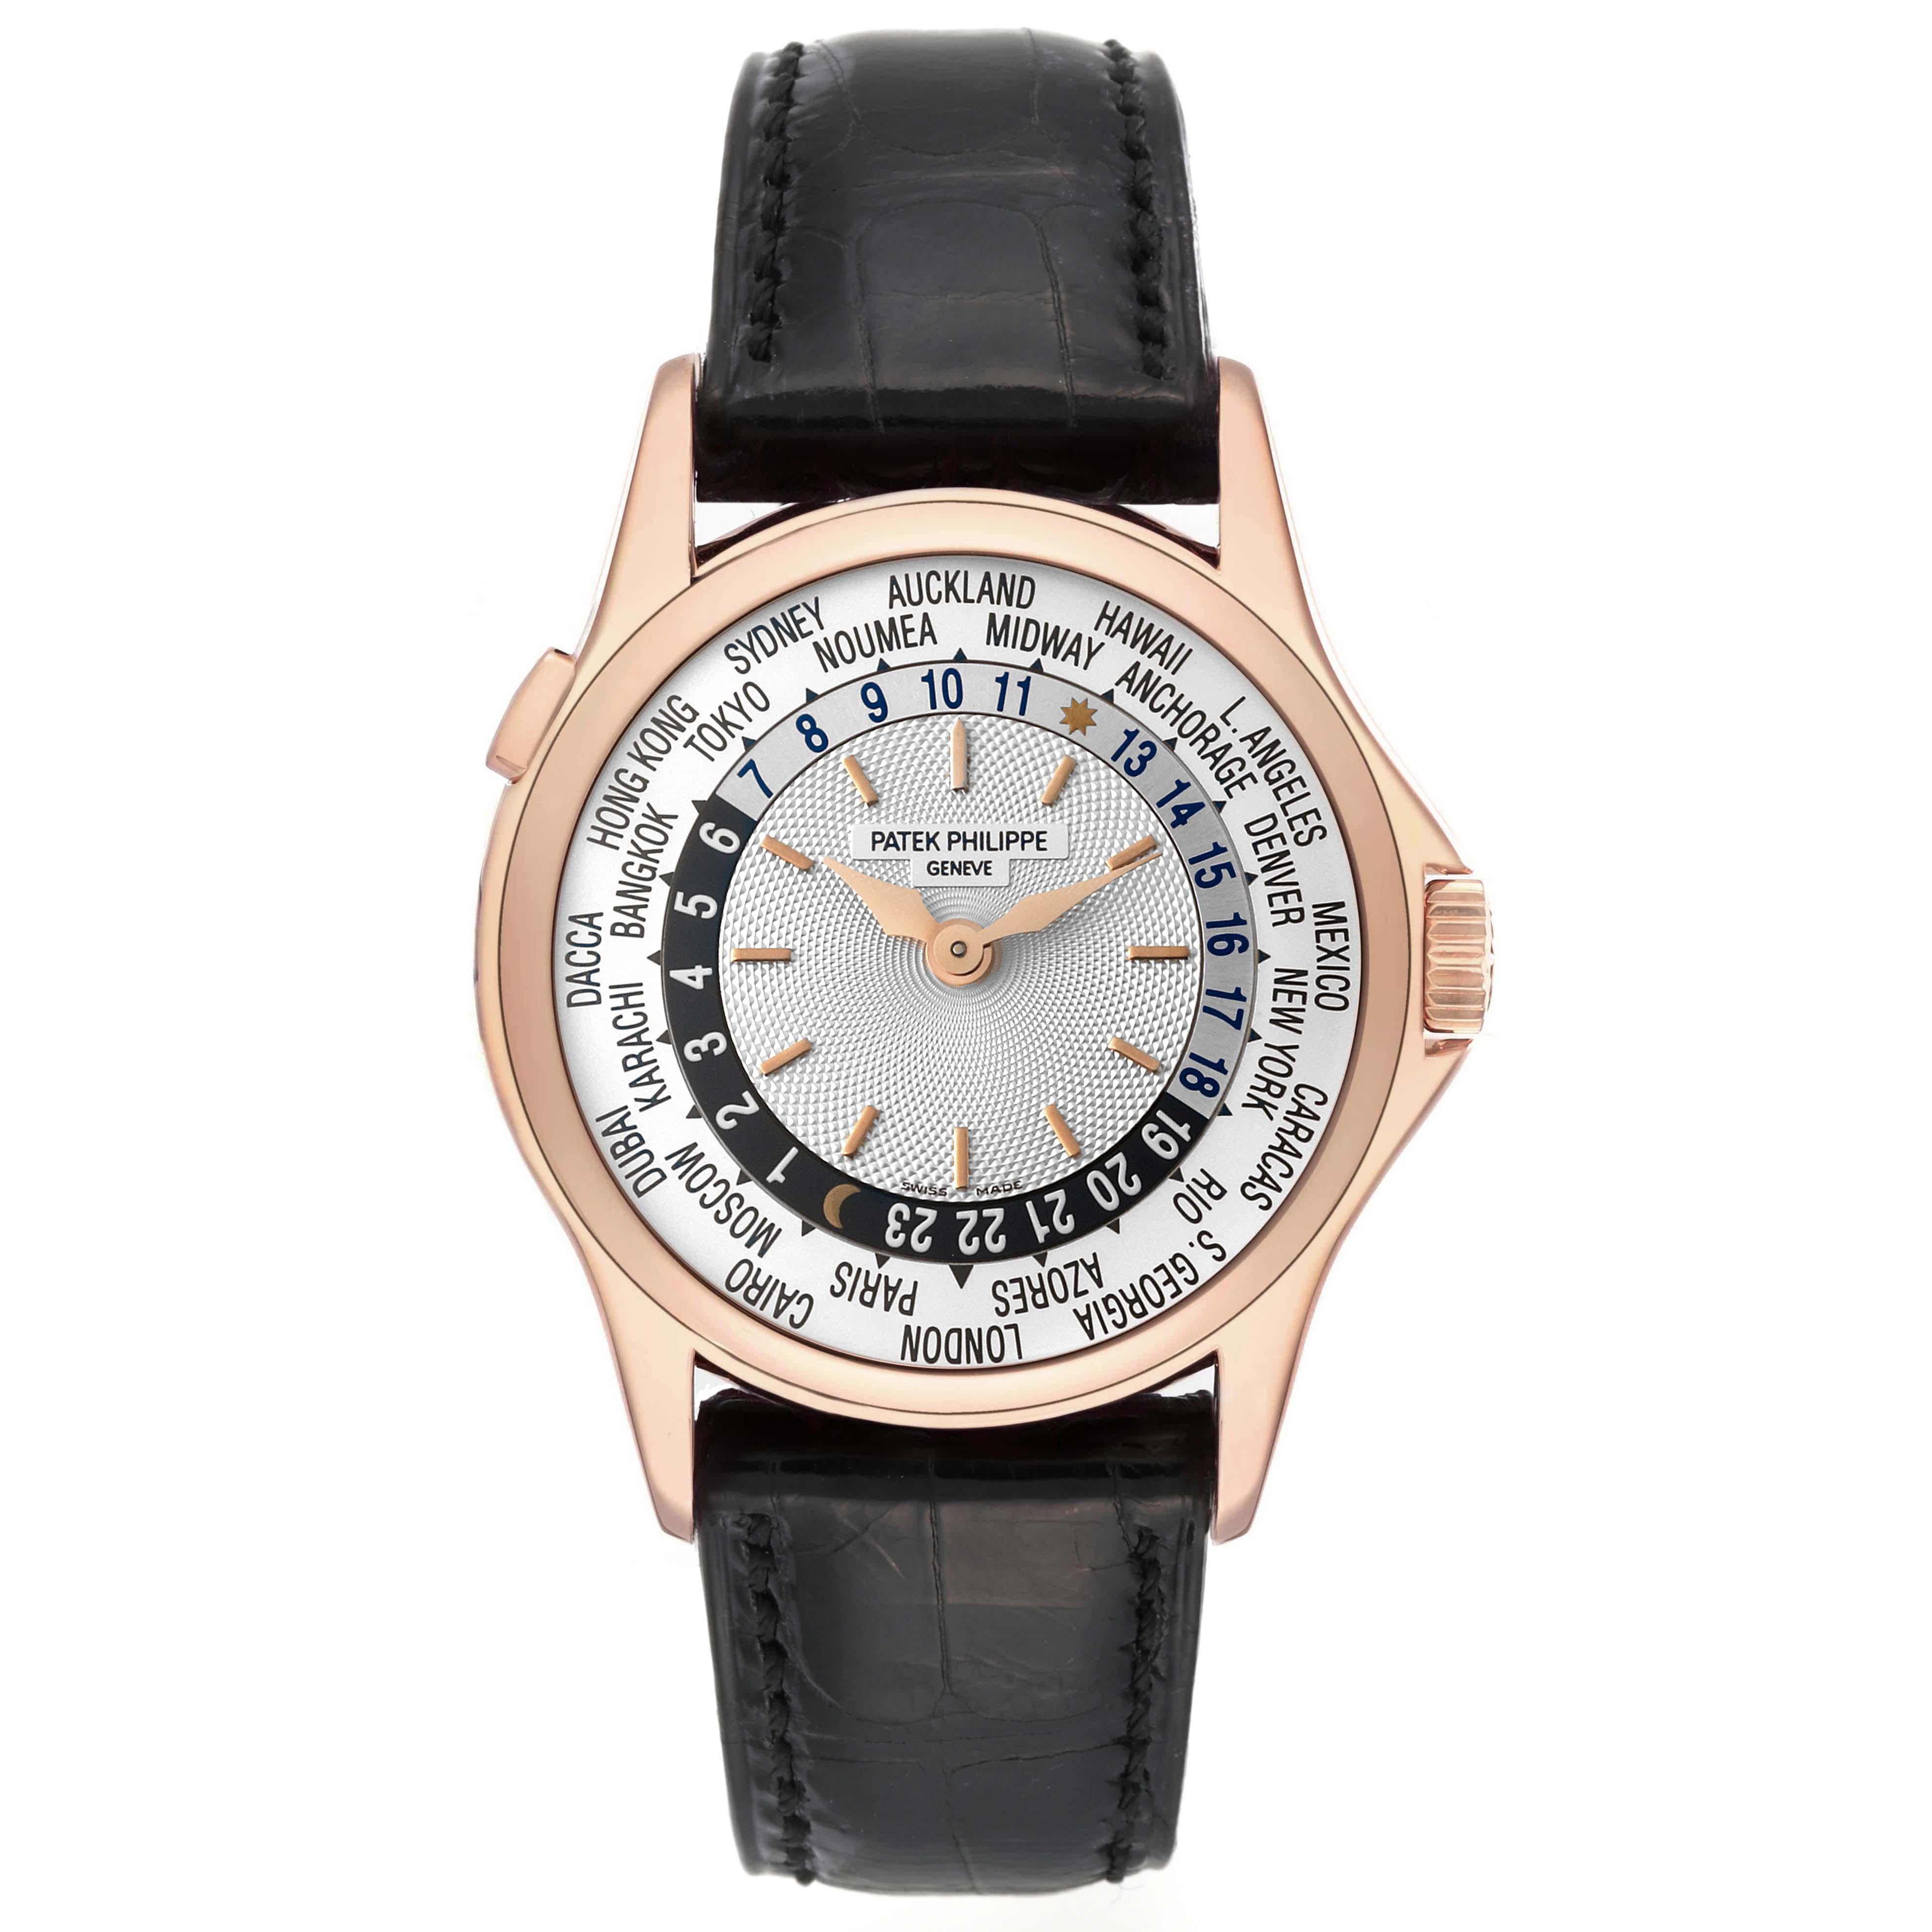 Patek Philippe World Time Automatic Silver Dial Rose Gold Mens Watch 5110 For Sale 1